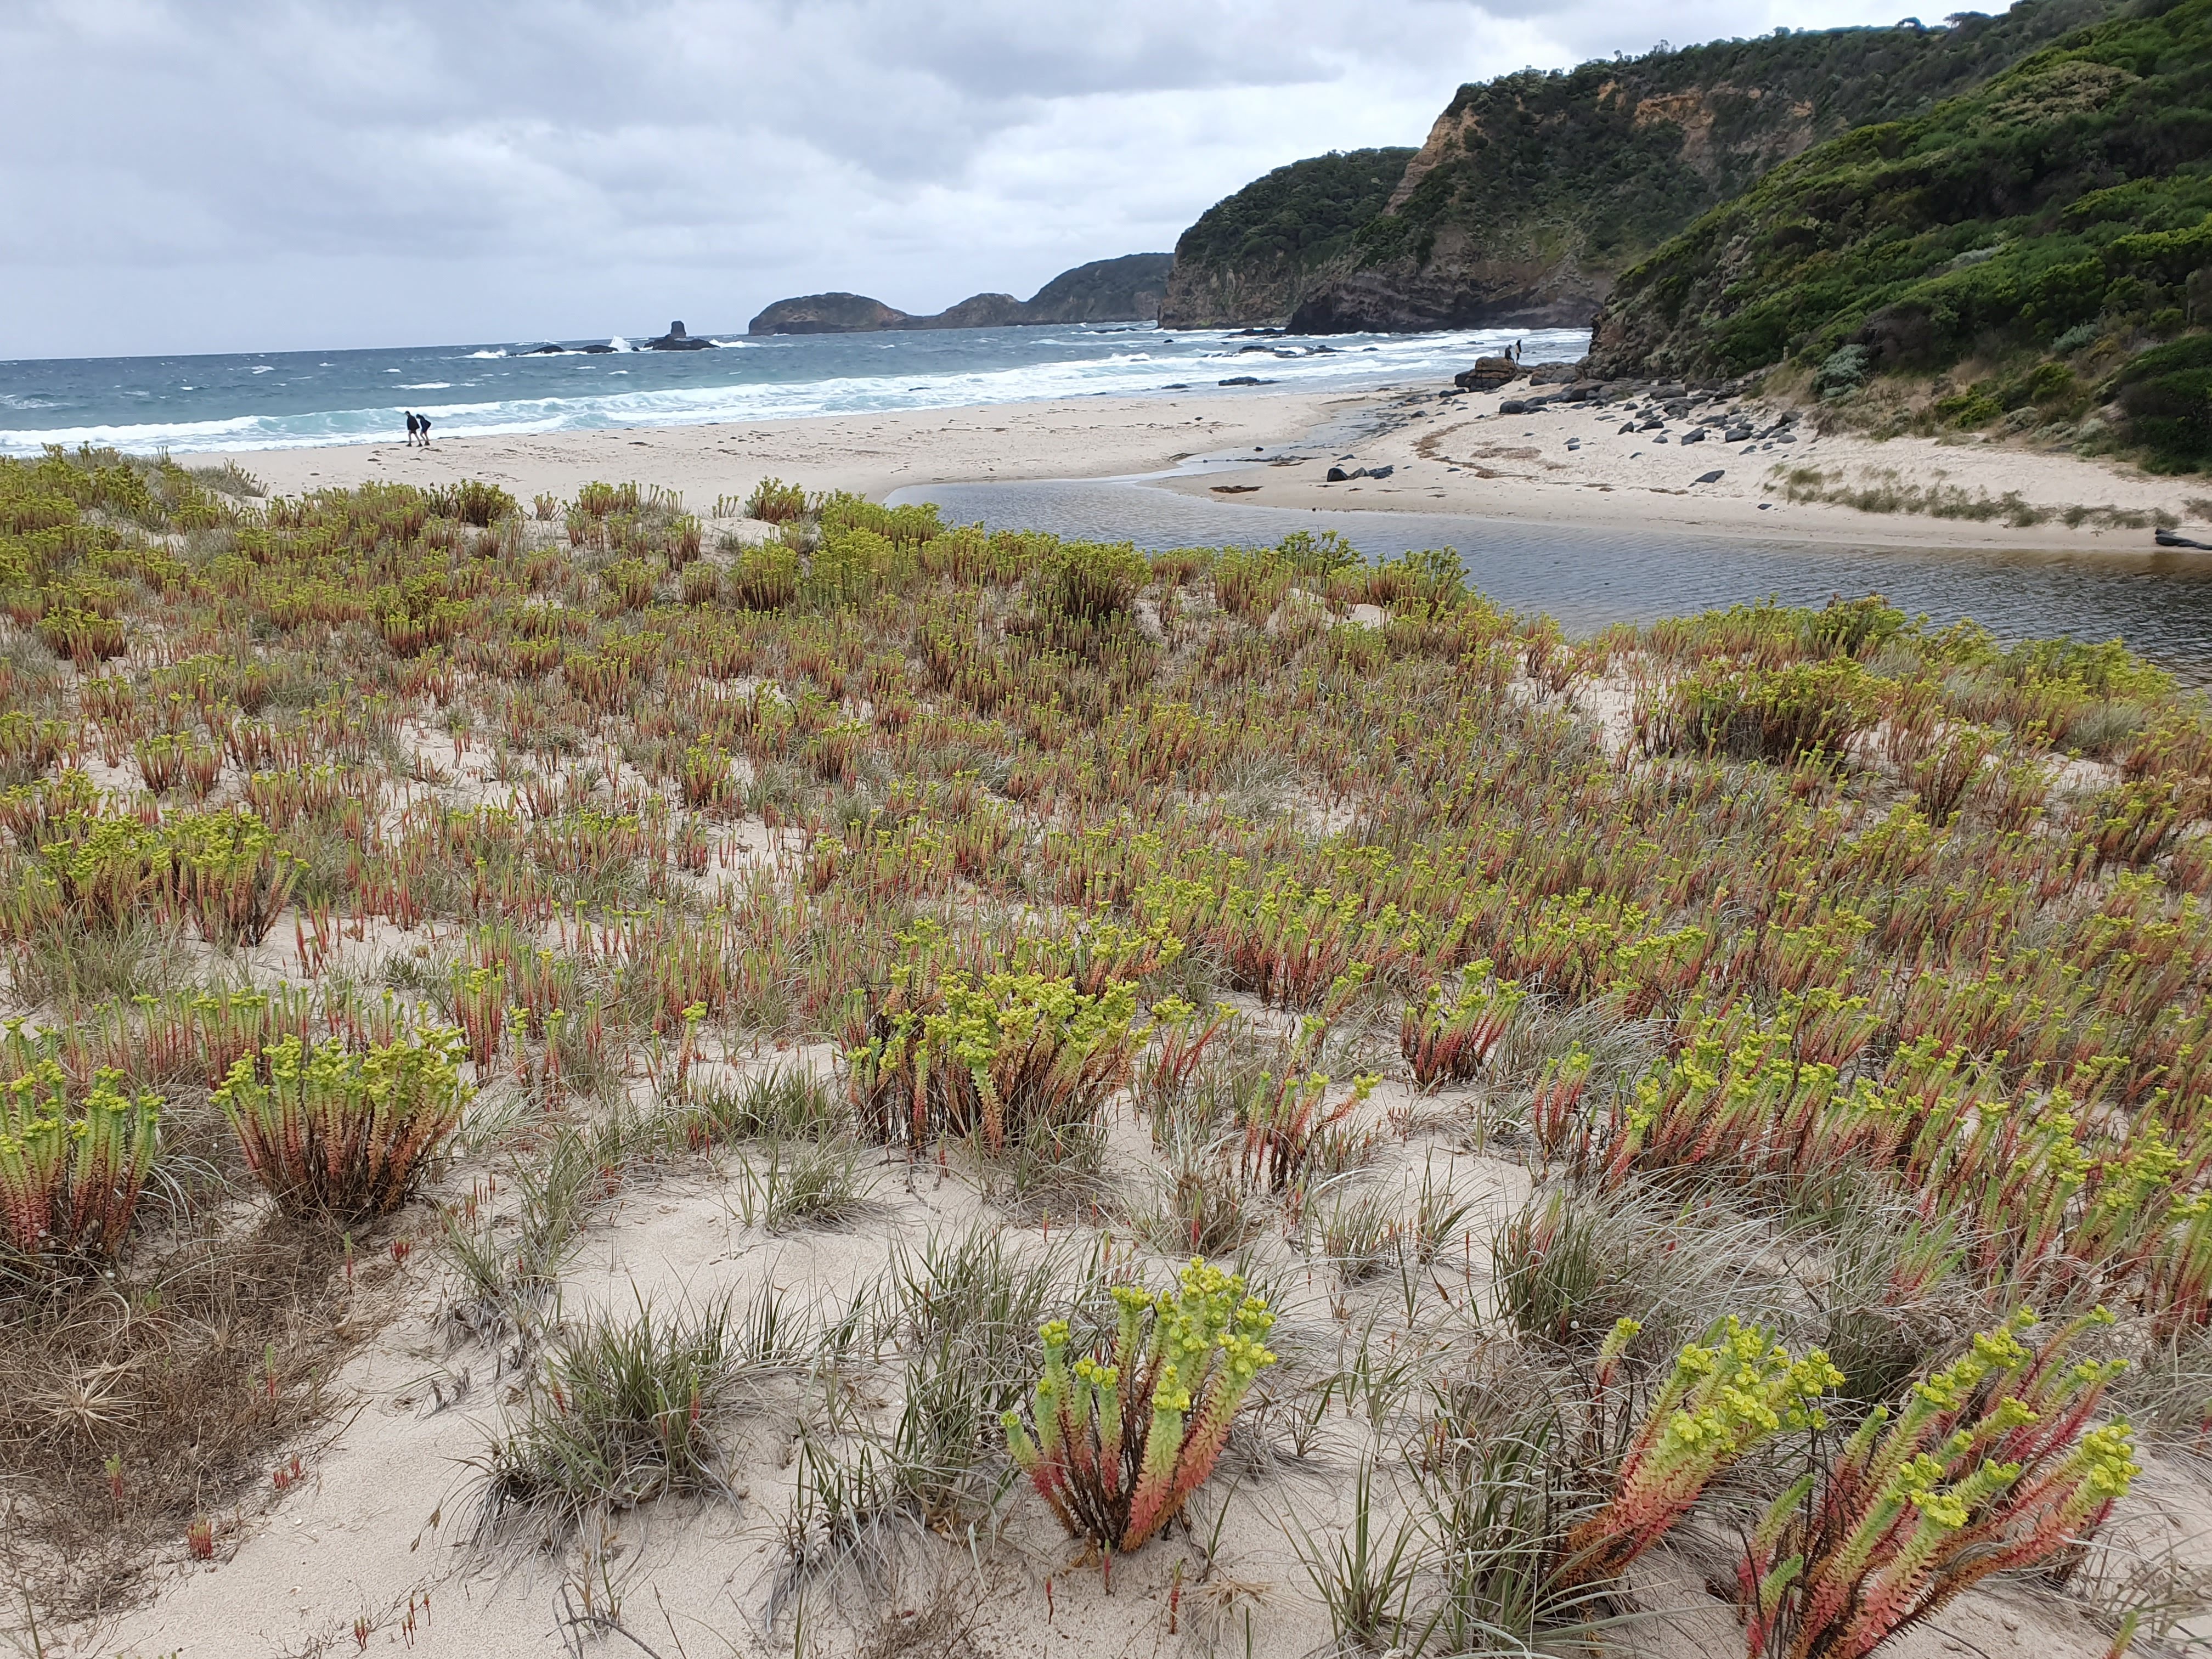 EM2Sea spurge prevents the natural movement of sand and alters dune structure